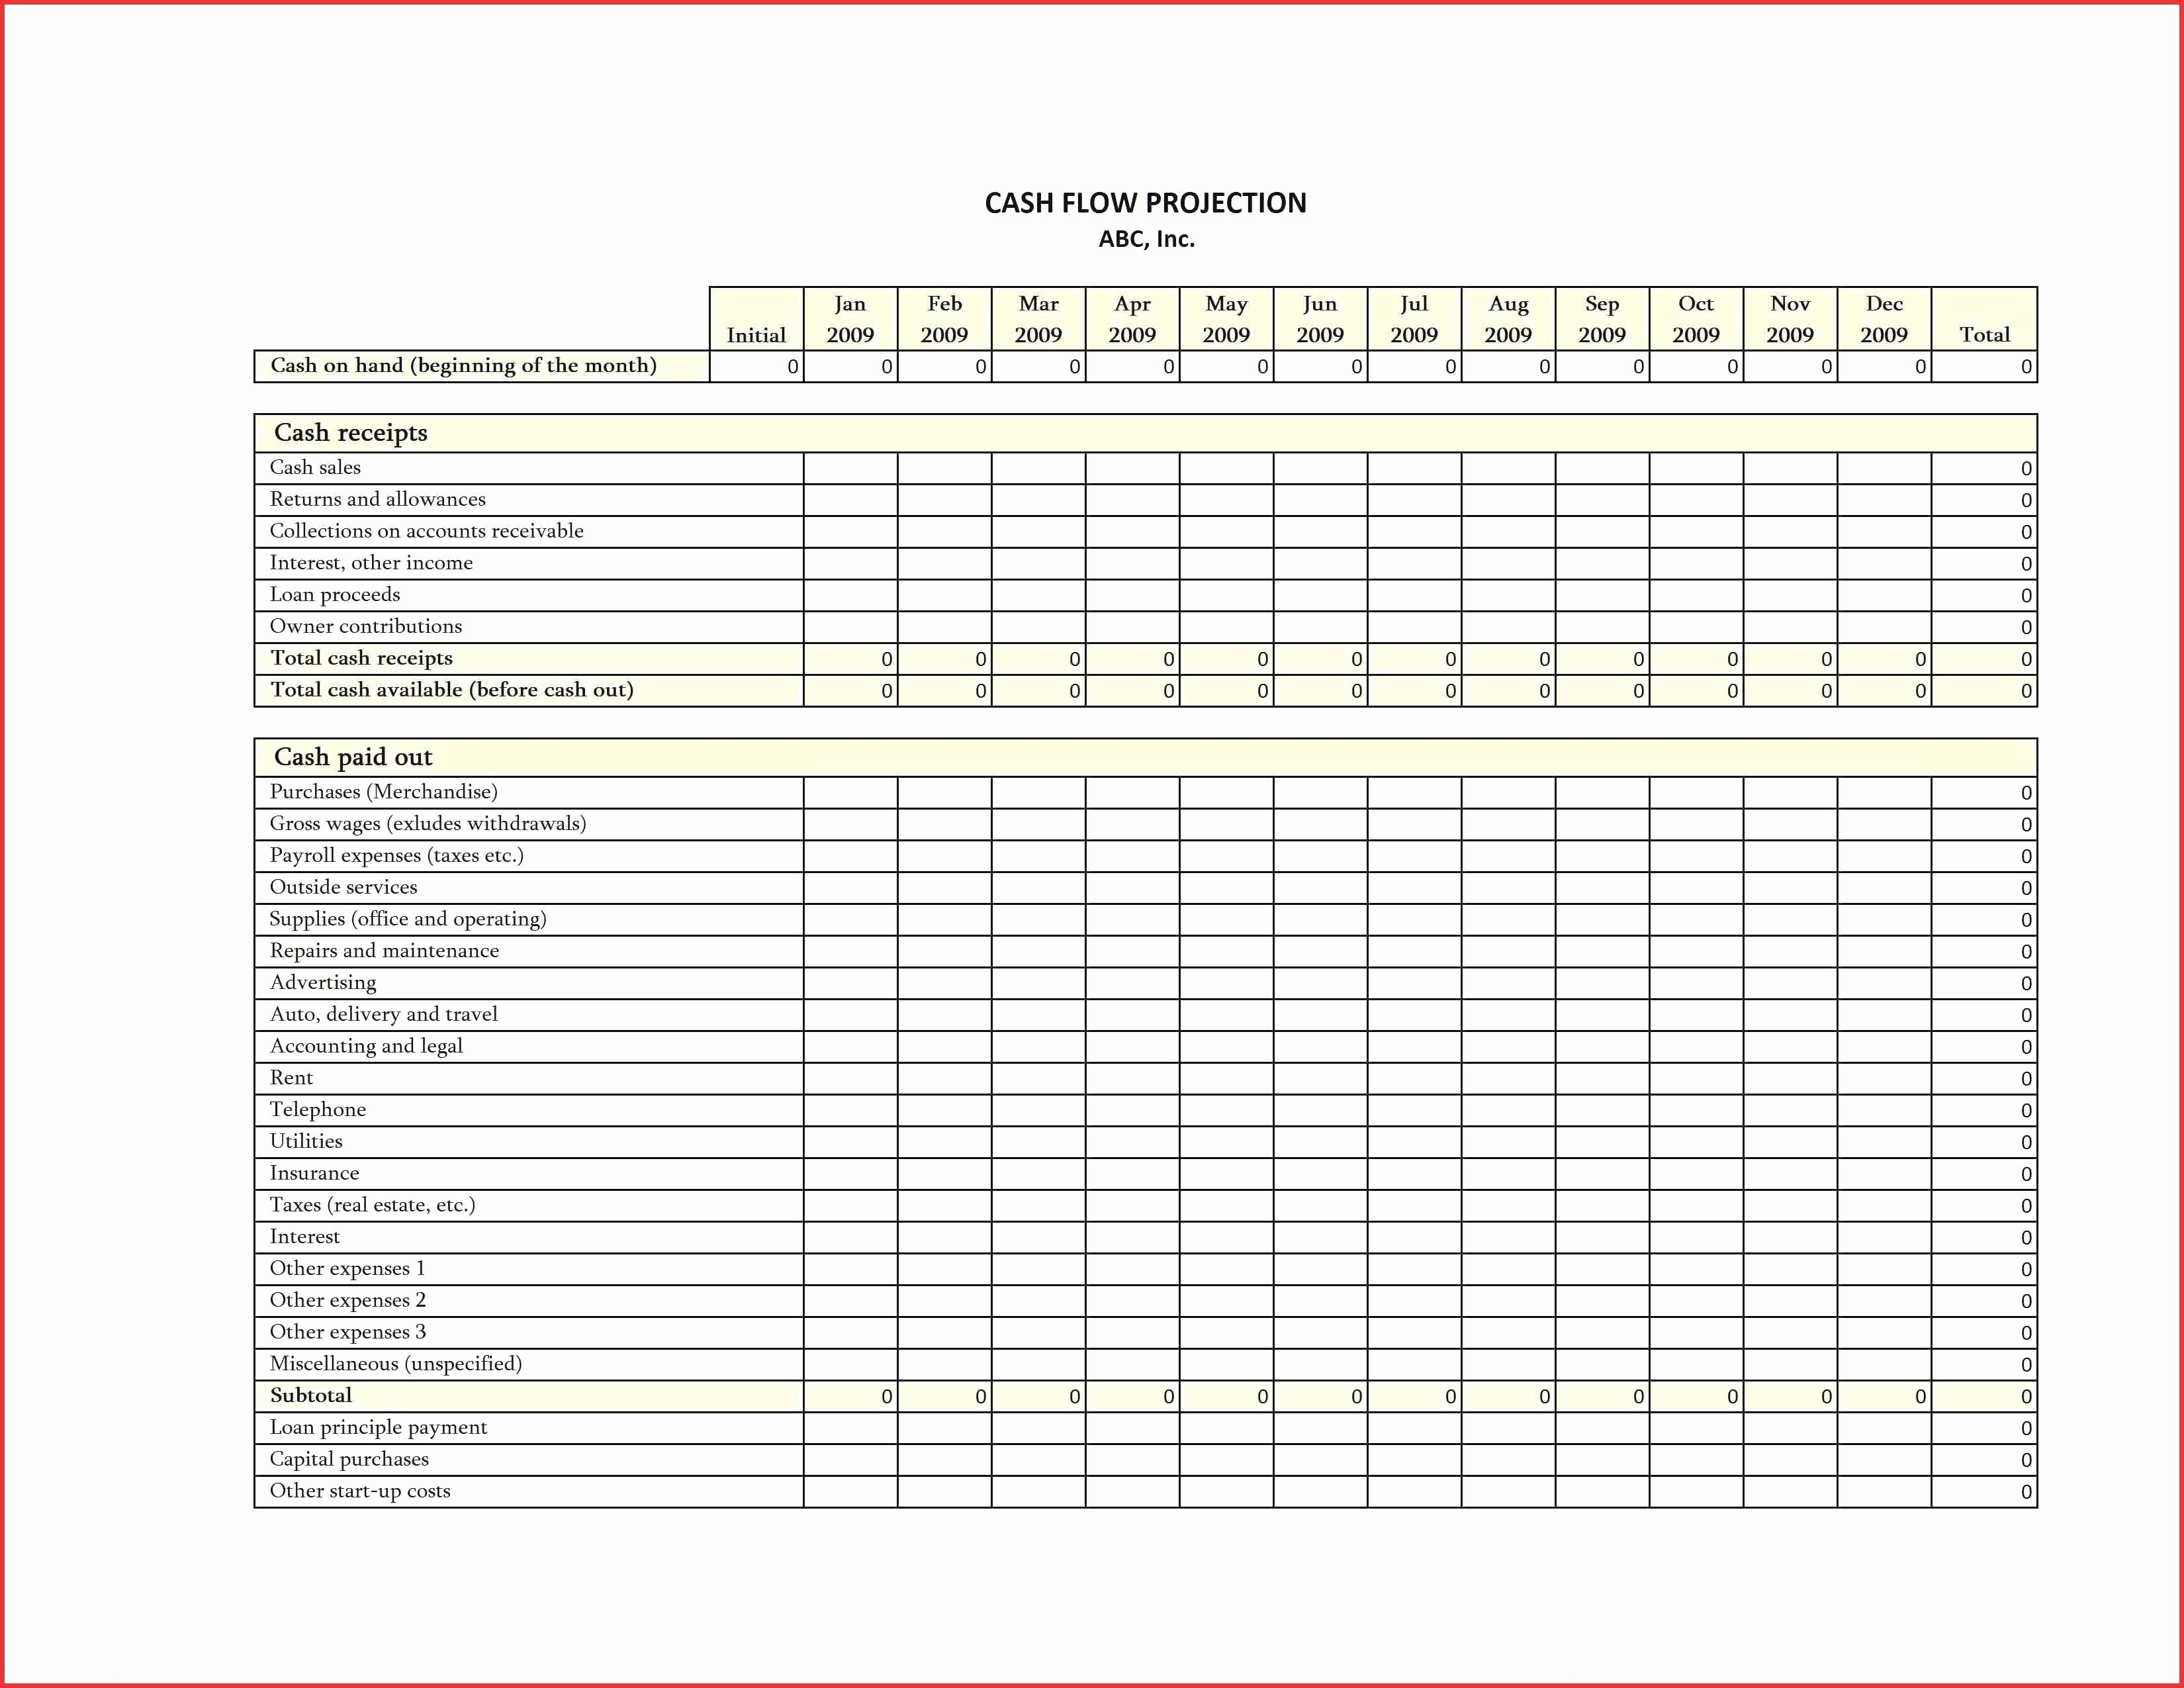 tax-spreadsheet-for-small-business-for-small-business-tax-spreadsheet-template-best-business